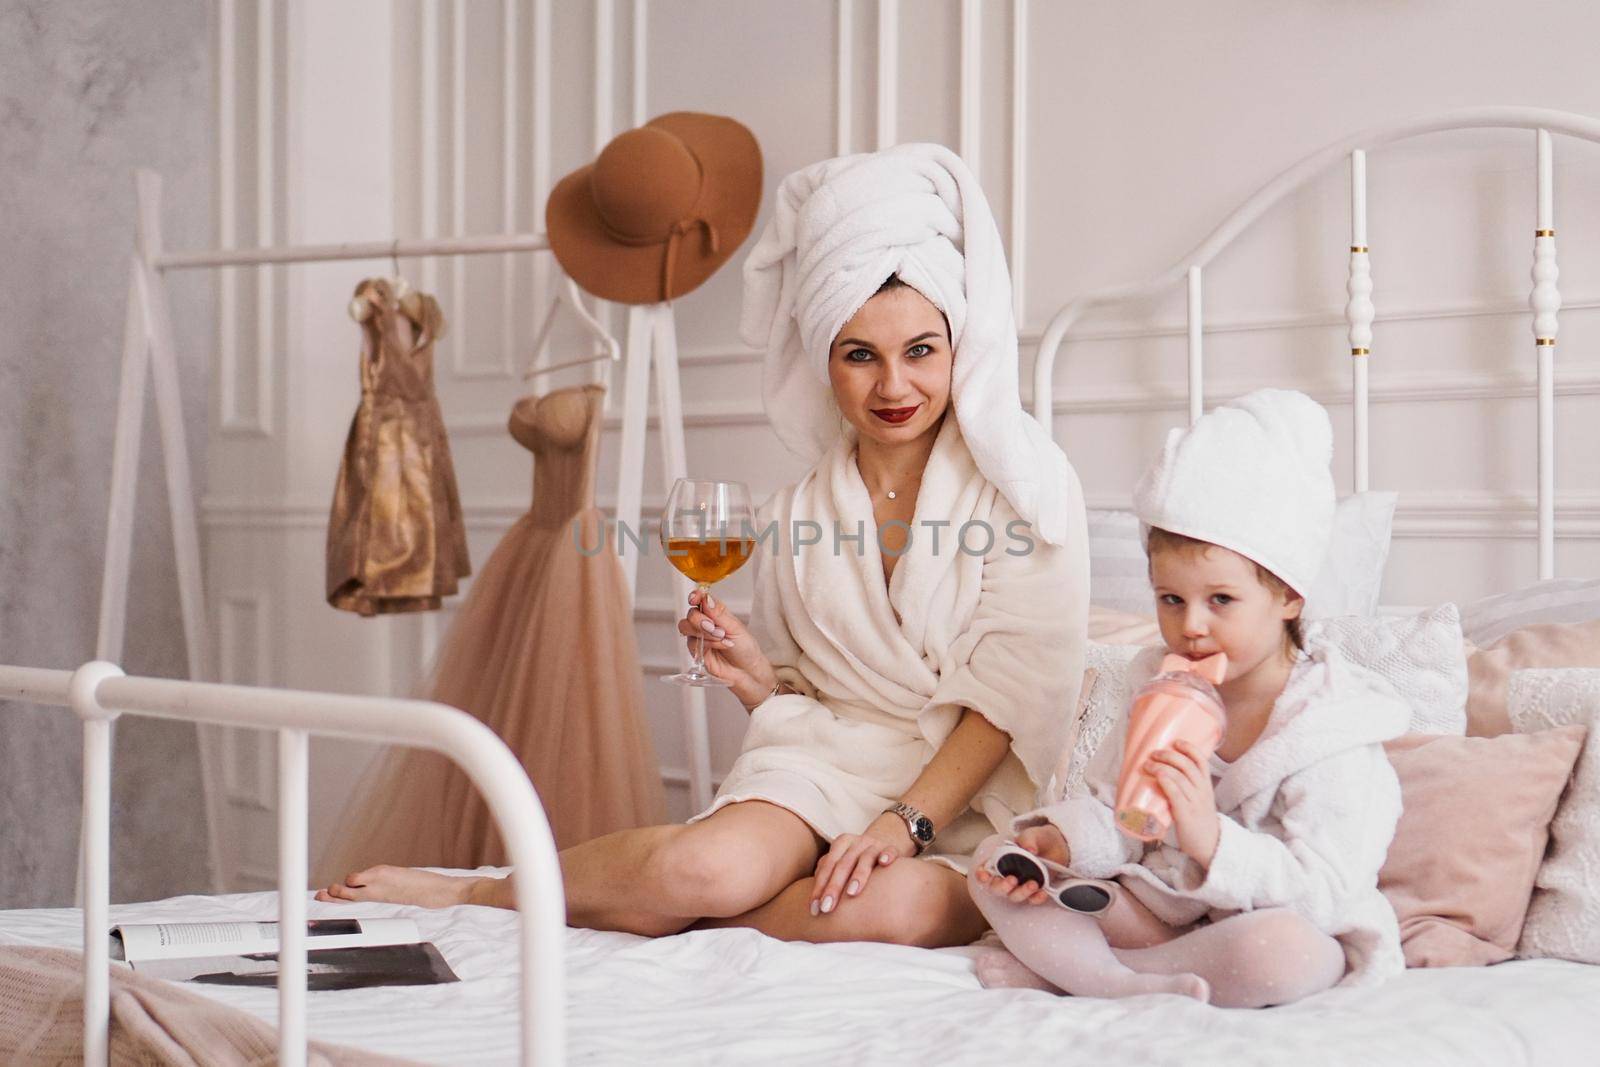 Mother and daughter in the bedroom in bathrobes by natali_brill